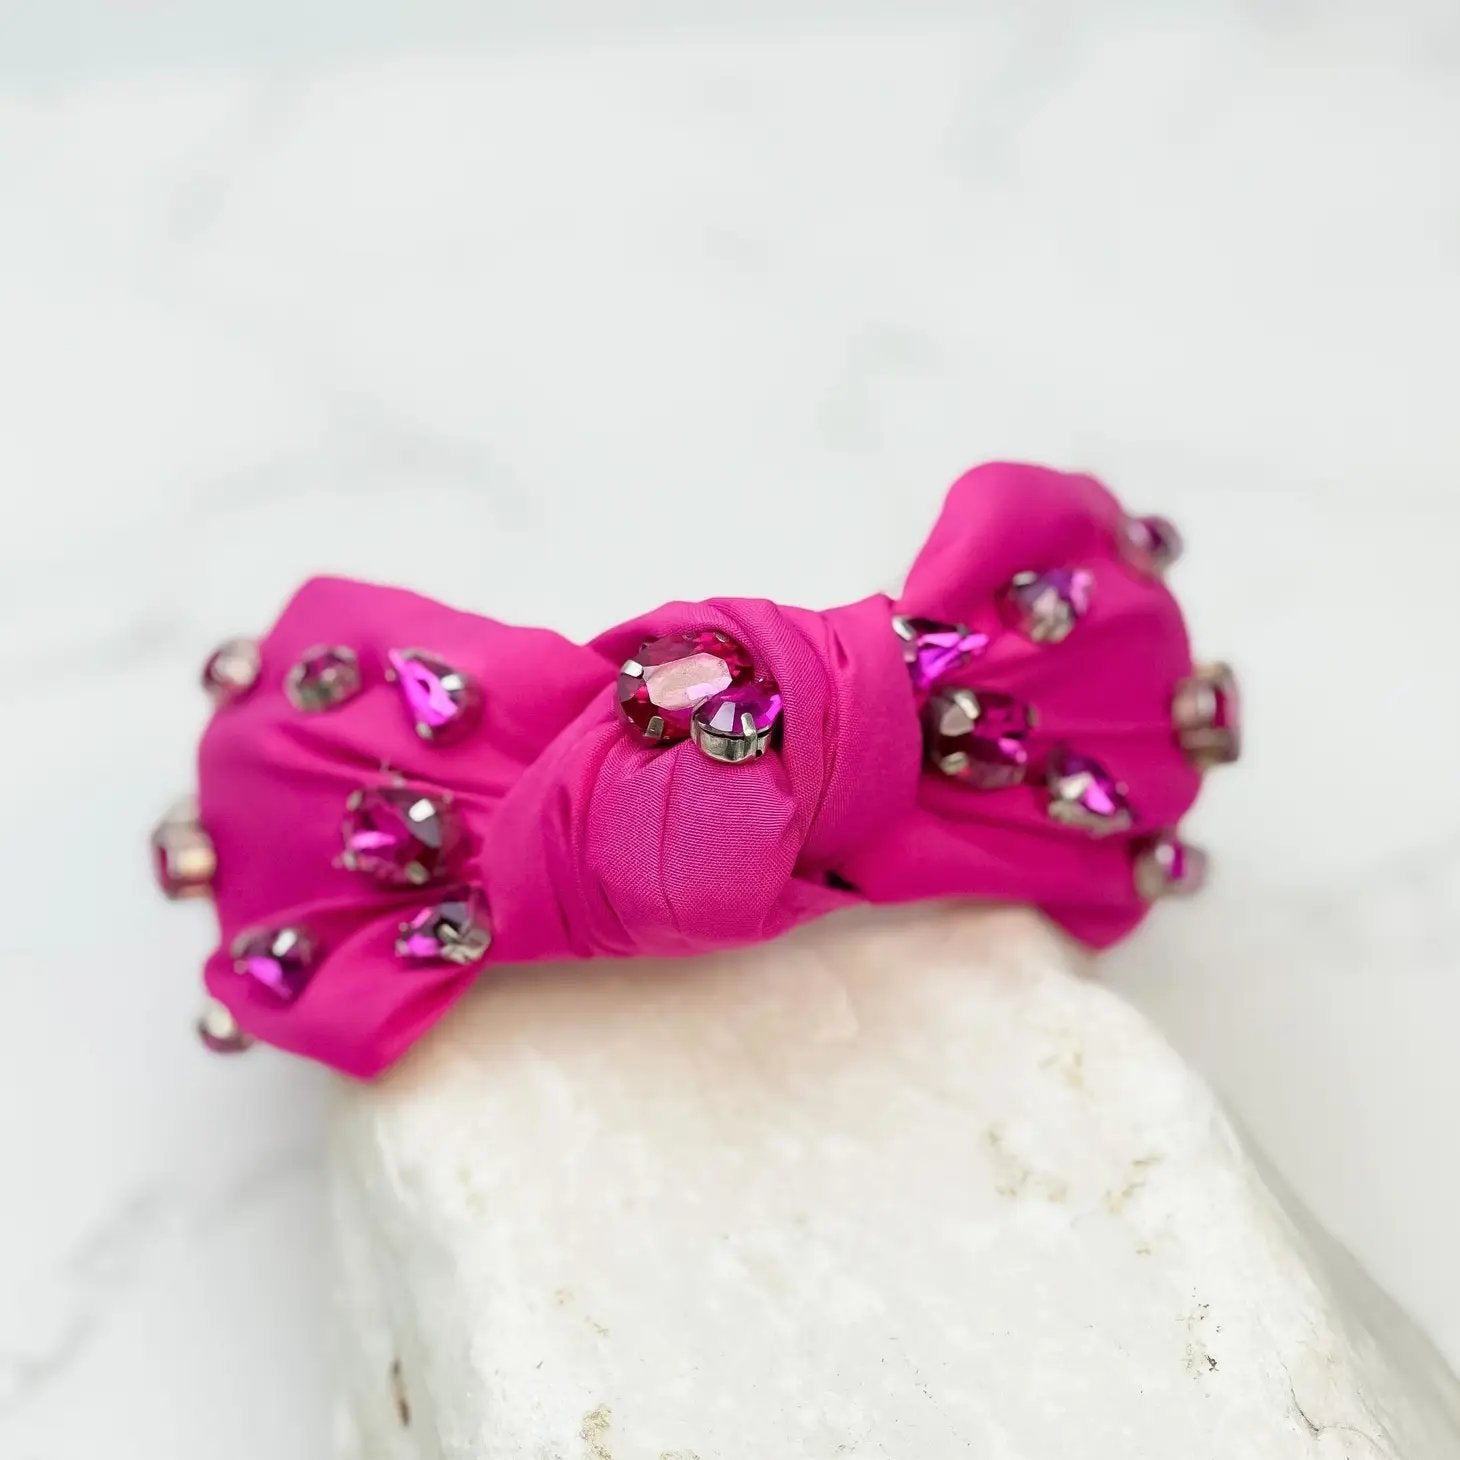 Hot Pink Hippie Hair Bead Pink Hair Accessory Hair Beads Pink Hair Charm  Hot Pink Inspired Hair Accessory -  Finland